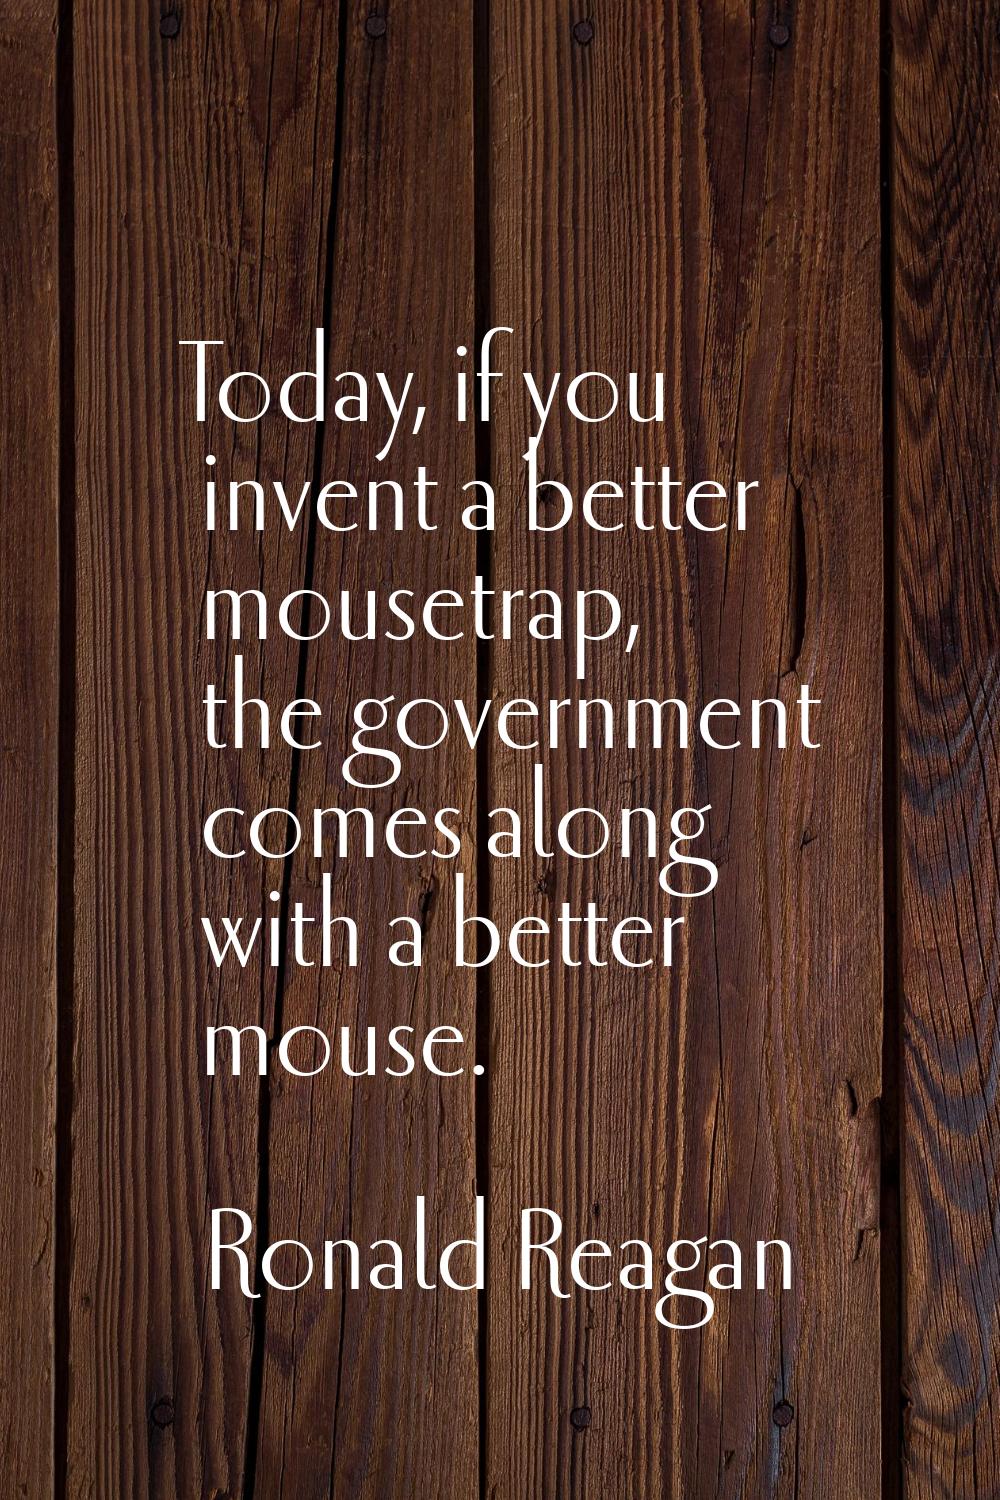 Today, if you invent a better mousetrap, the government comes along with a better mouse.